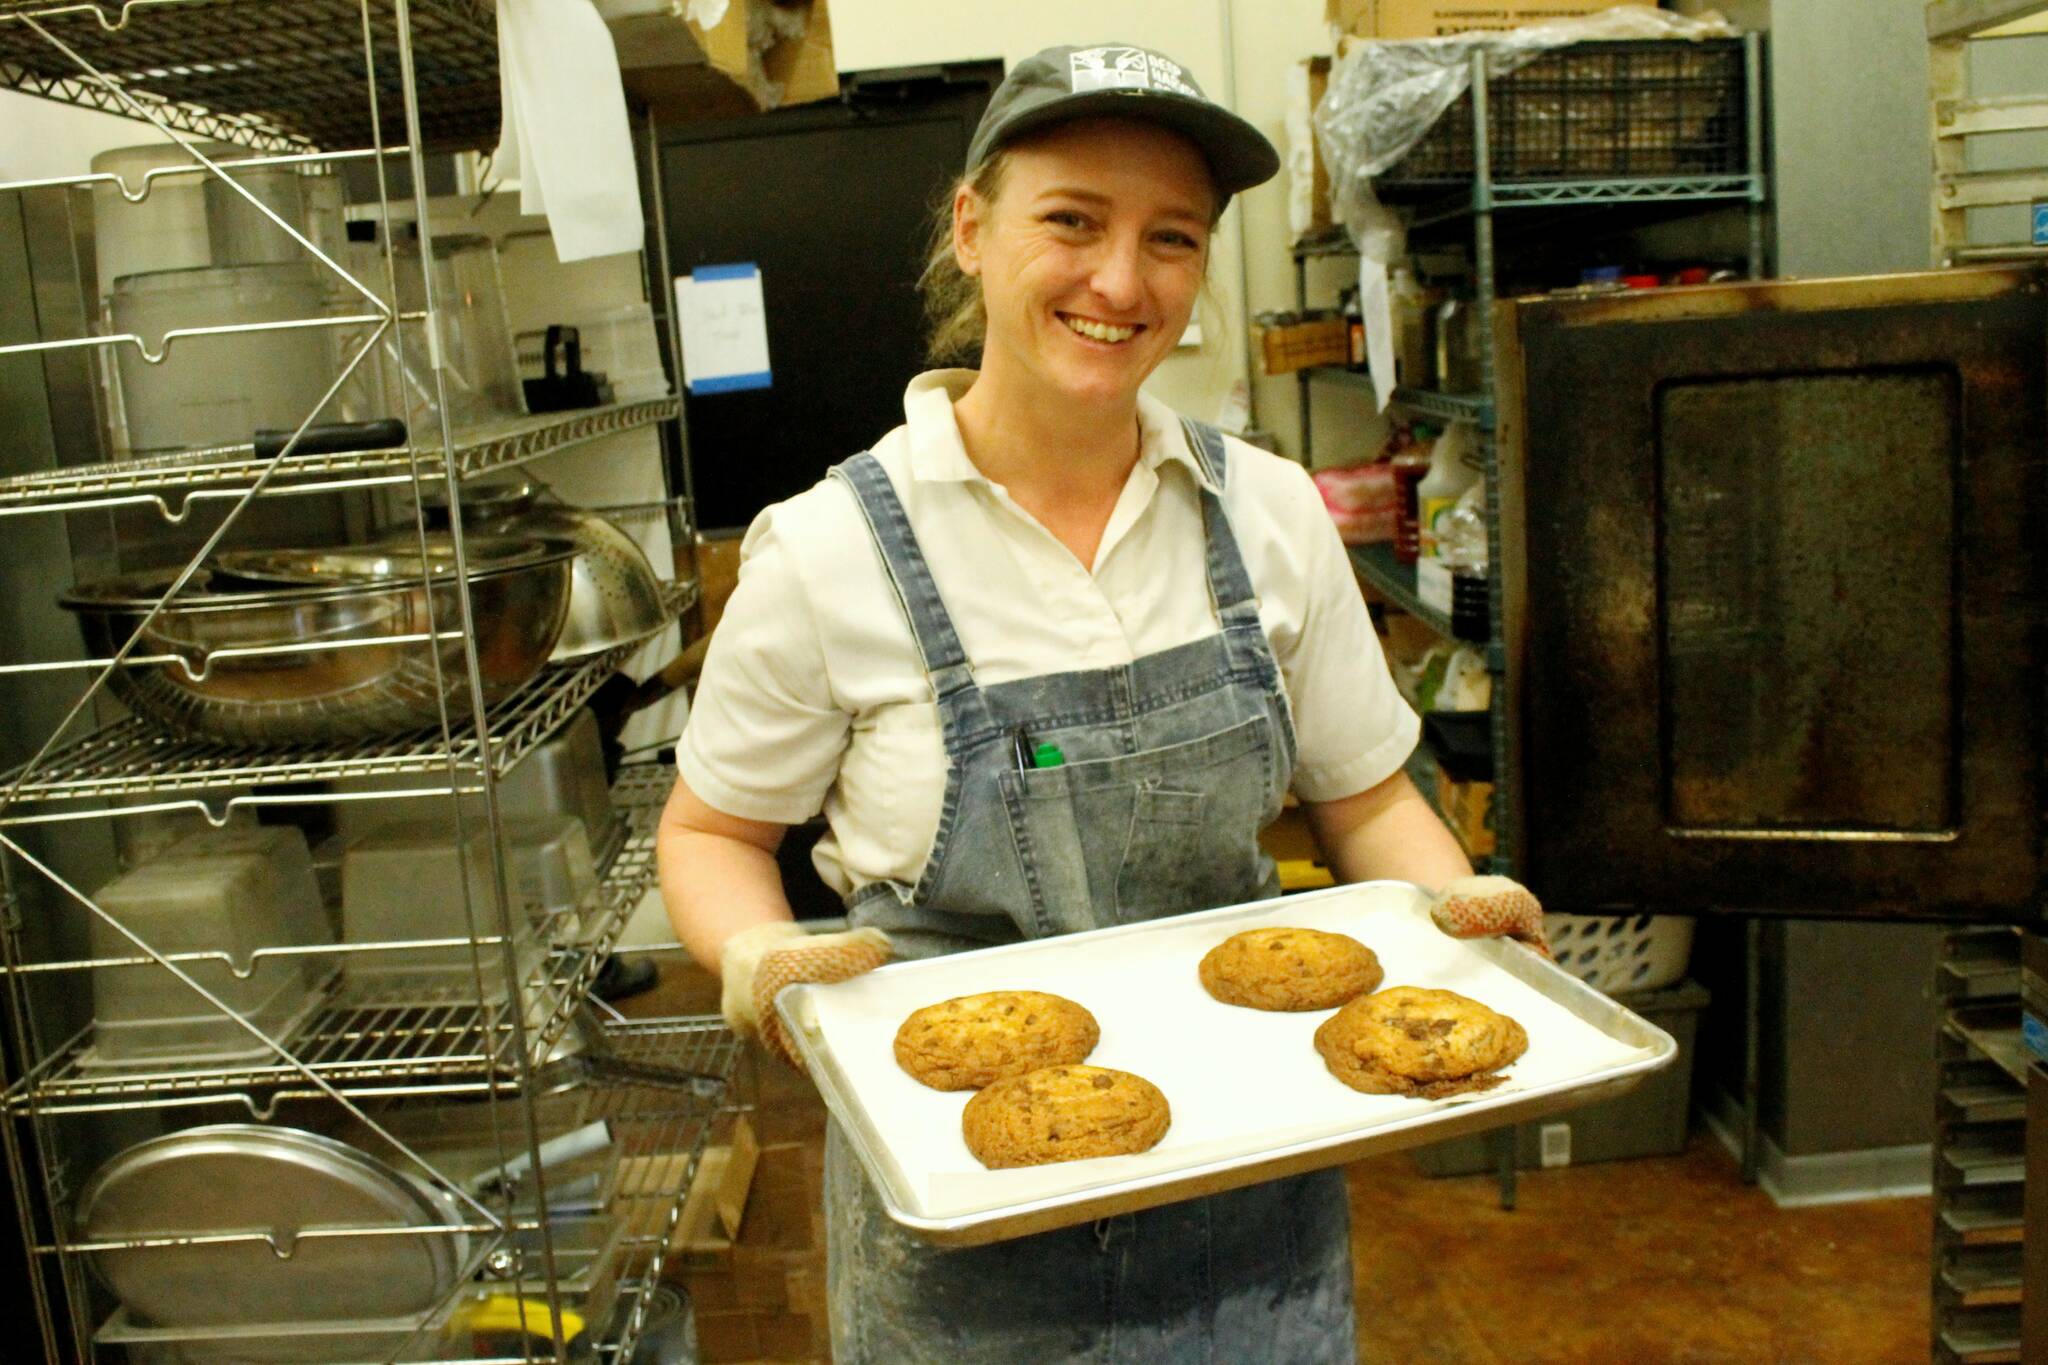 Photo by Kira Erickson/South Whidbey Record
Baker Camille Green holds a tray of chocolate-chip cookies fresh from the oven.